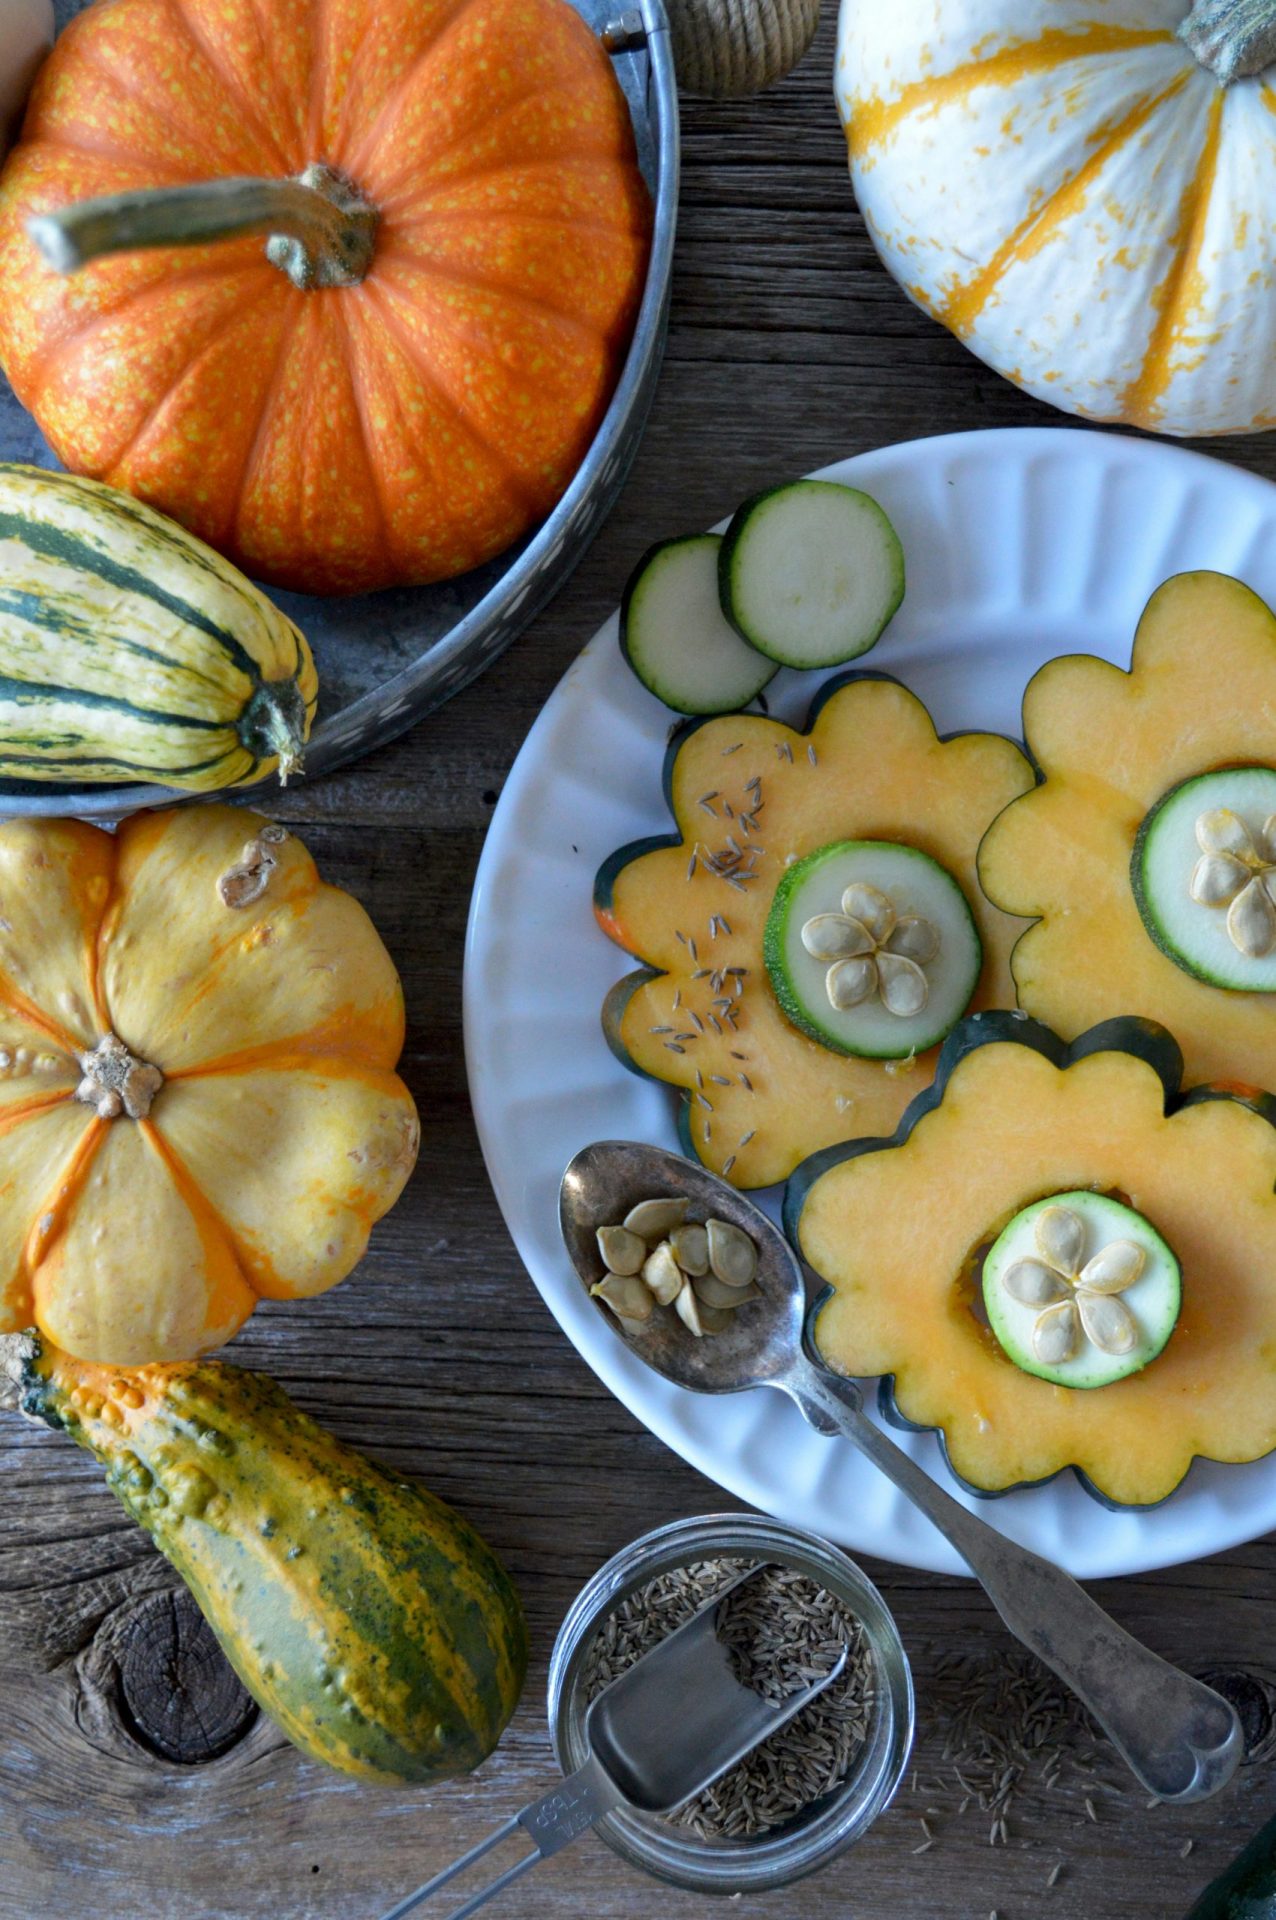 Squash vs Pumpkin: What’s the Difference